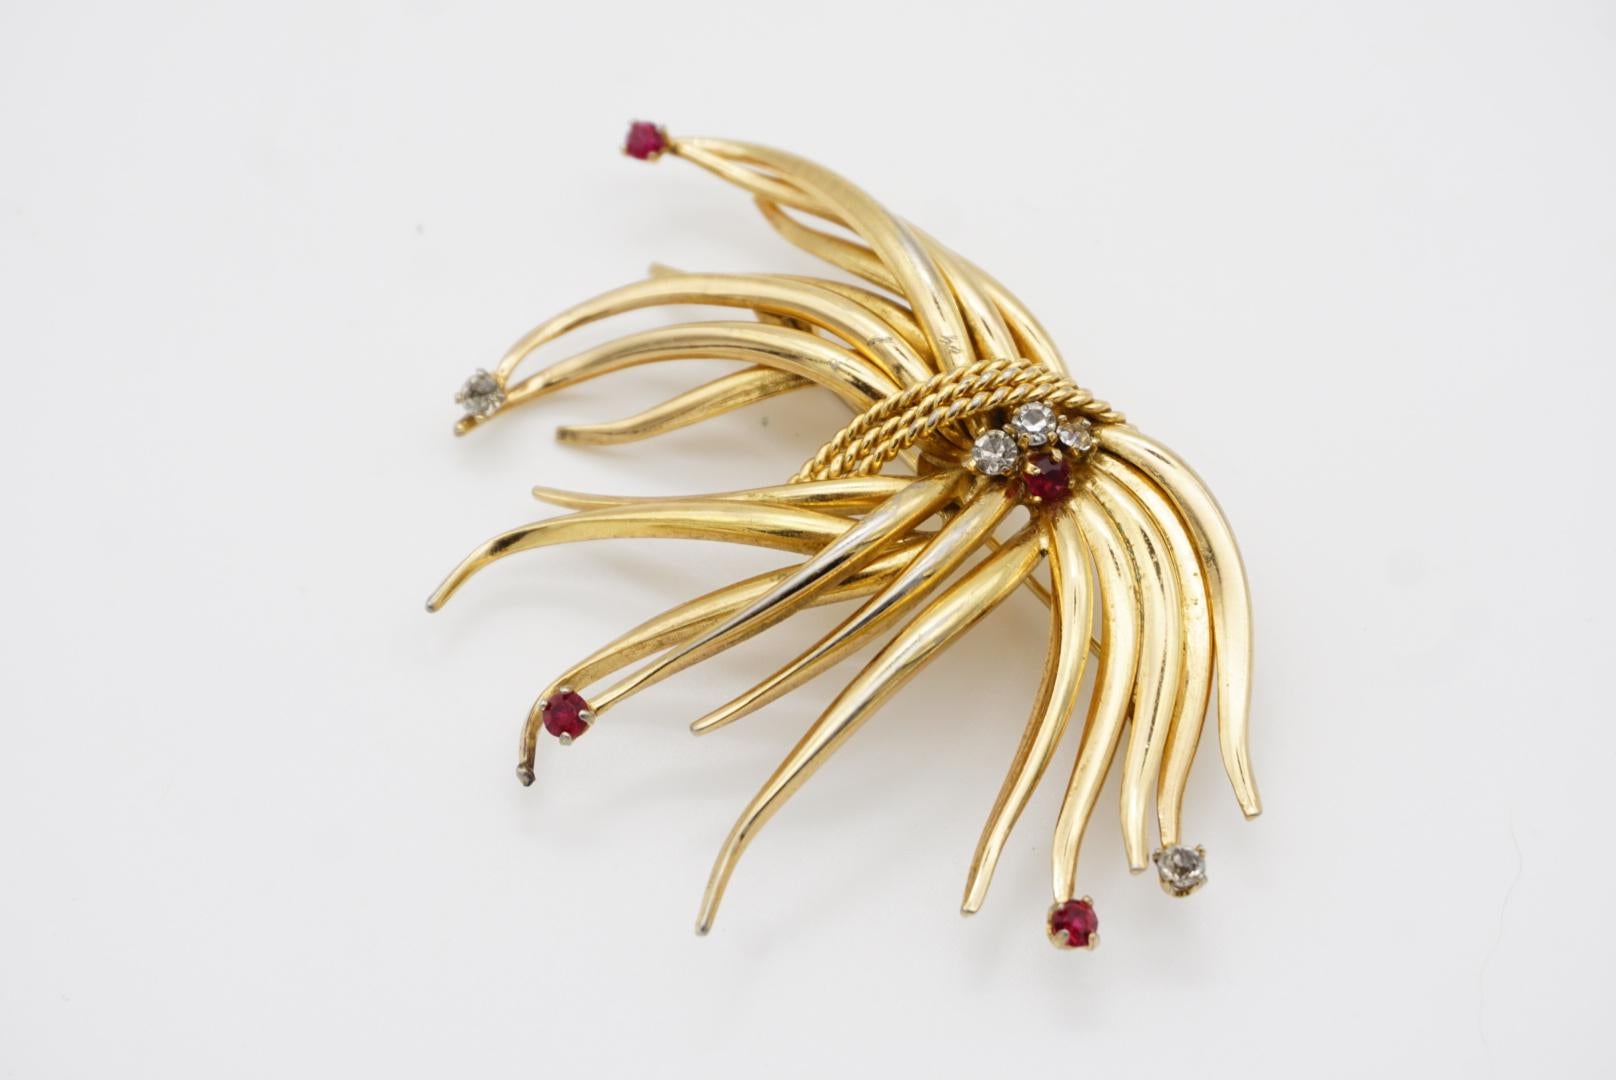 Christian Dior GROSSE 1962 Vintage Large Intertwined Flower Ruby Crystals Brooch For Sale 6